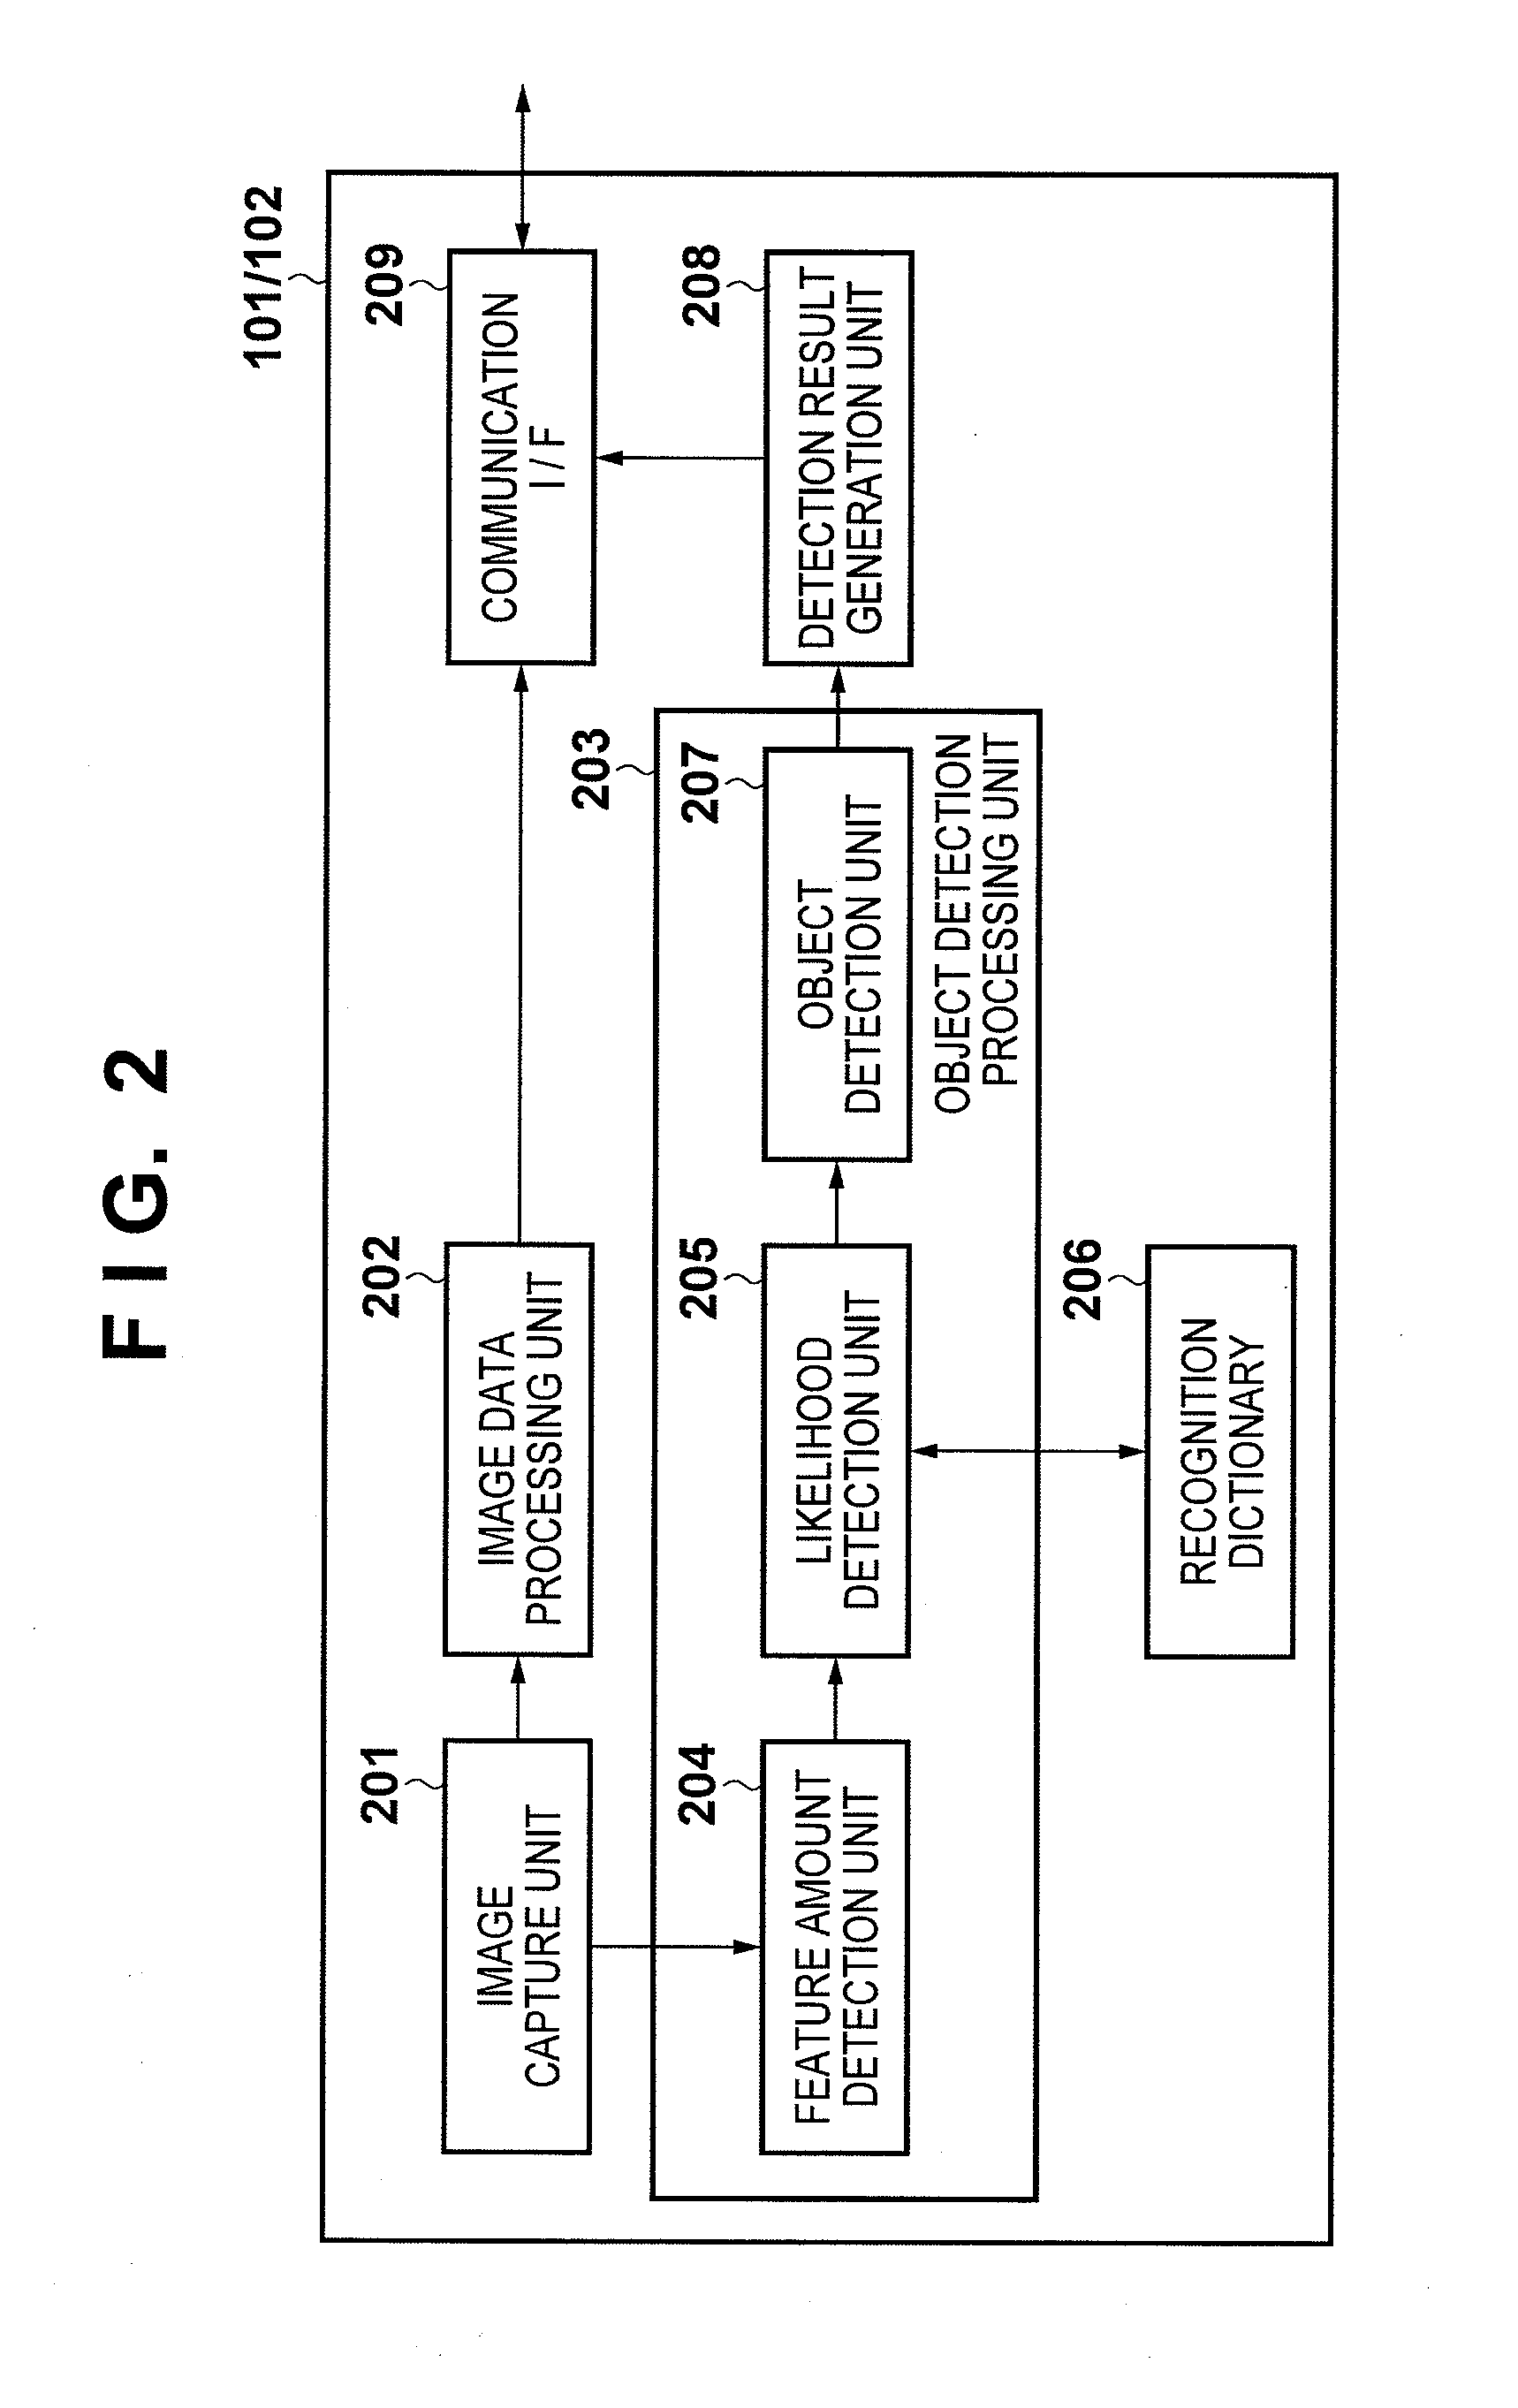 Image processing system, image capture apparatus, image processing apparatus, control method therefor, and program